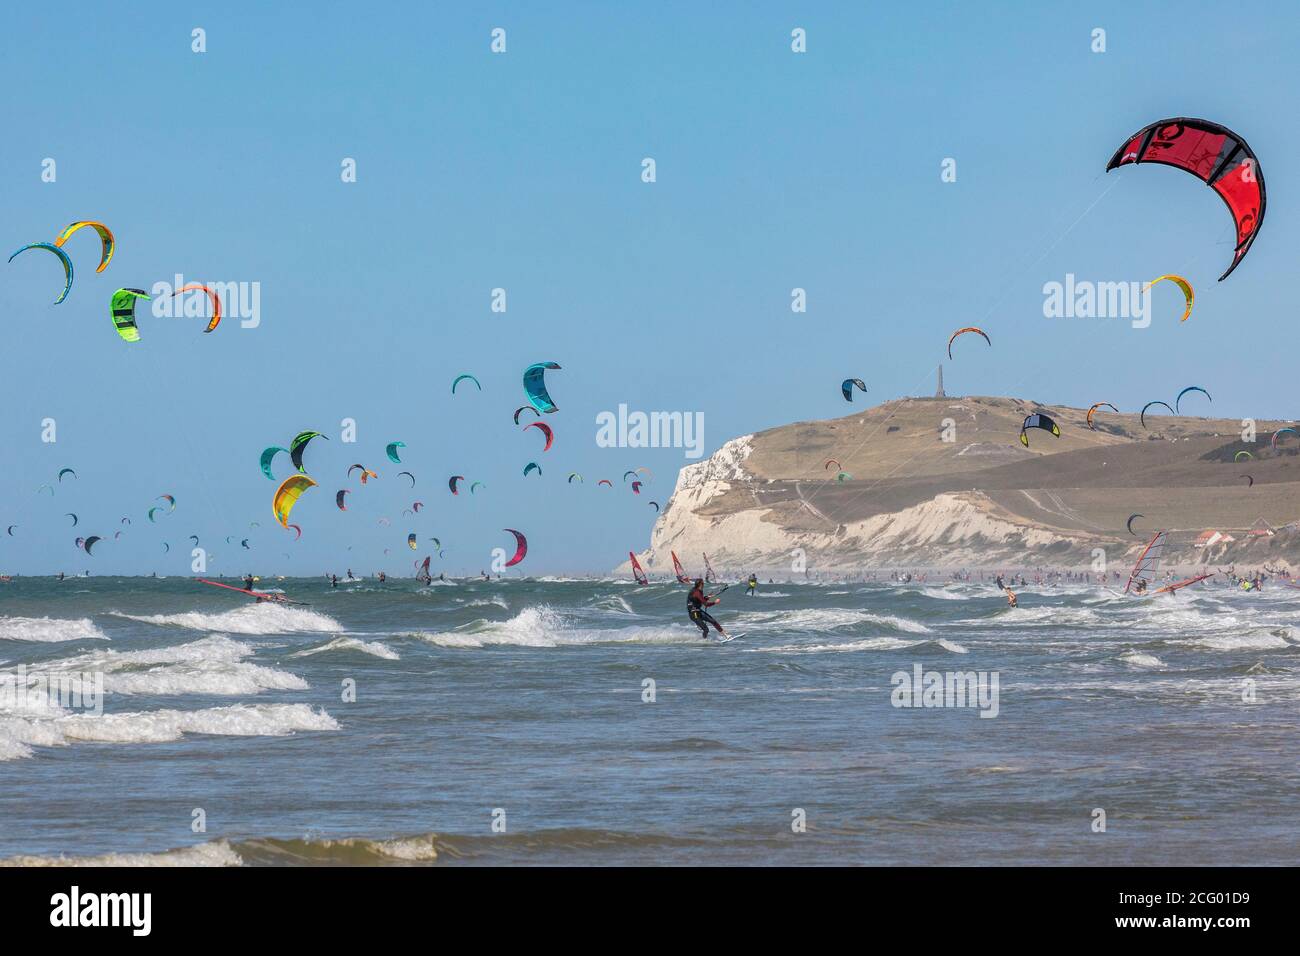 France, Pas de Calais, Wissant, kitesurfing and windsurfing with the Cape Blanc-Nez in the background Stock Photo